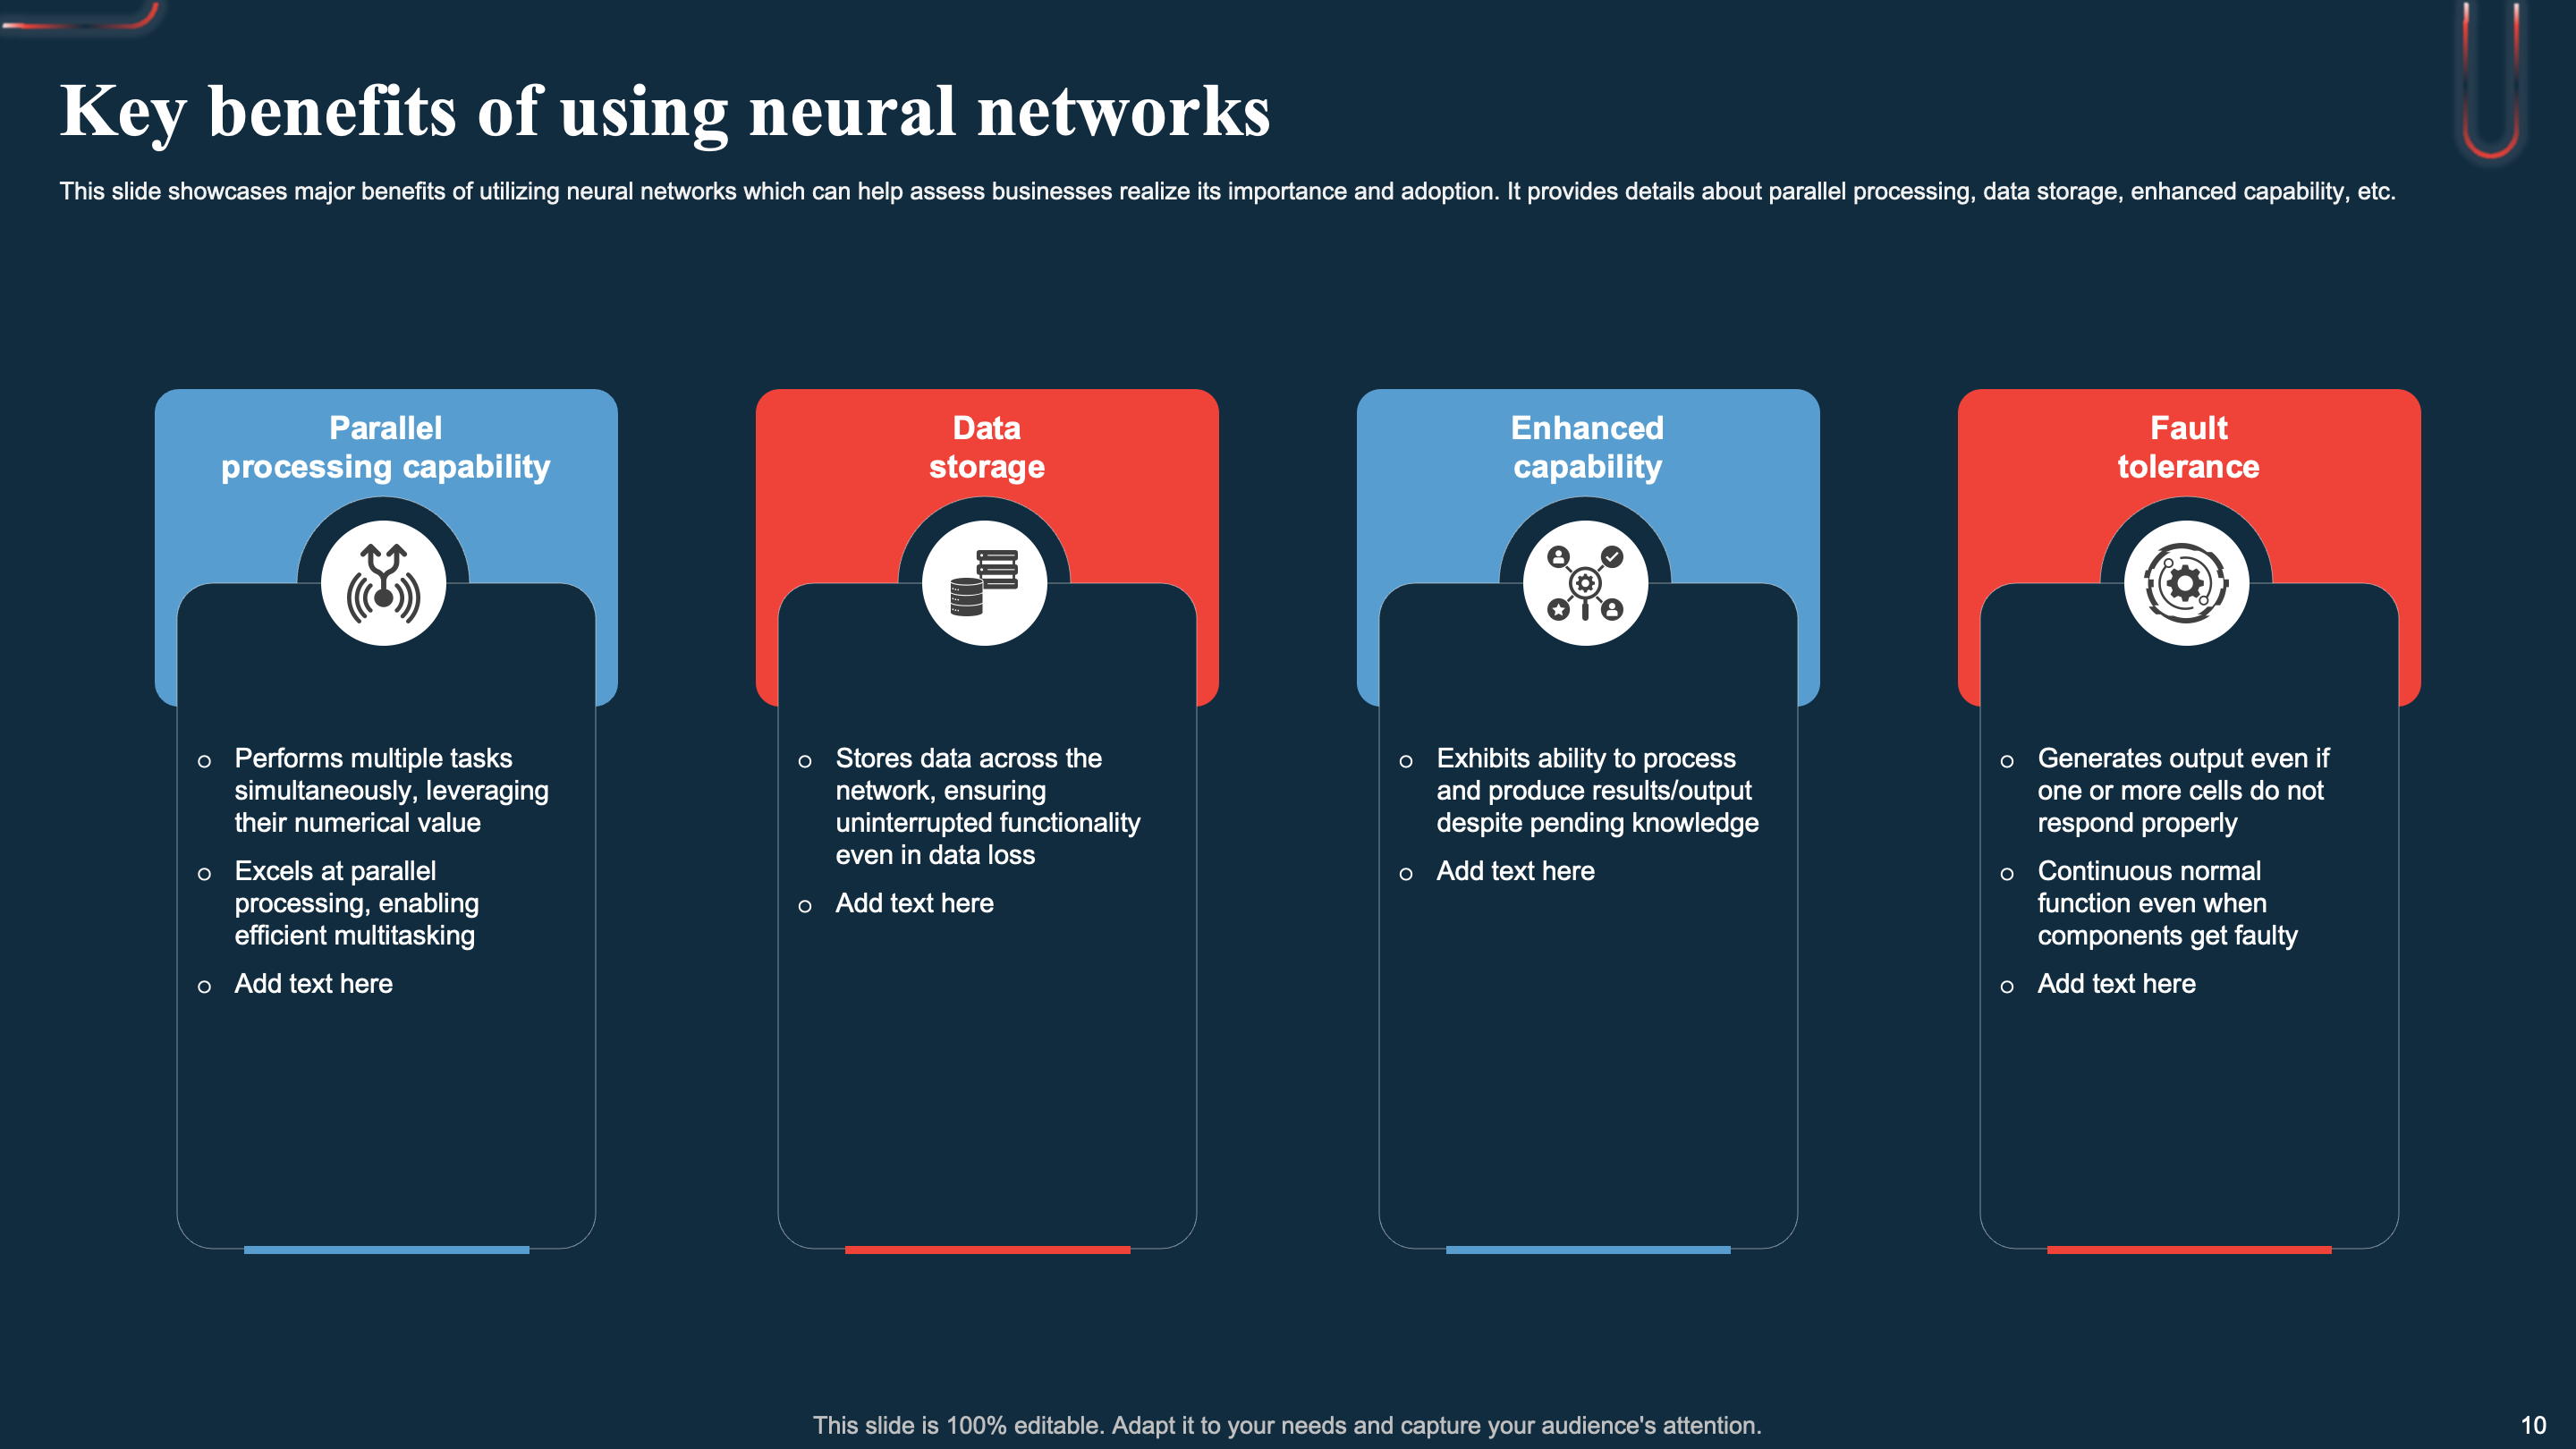 Key Benefits of Using Neural Networks